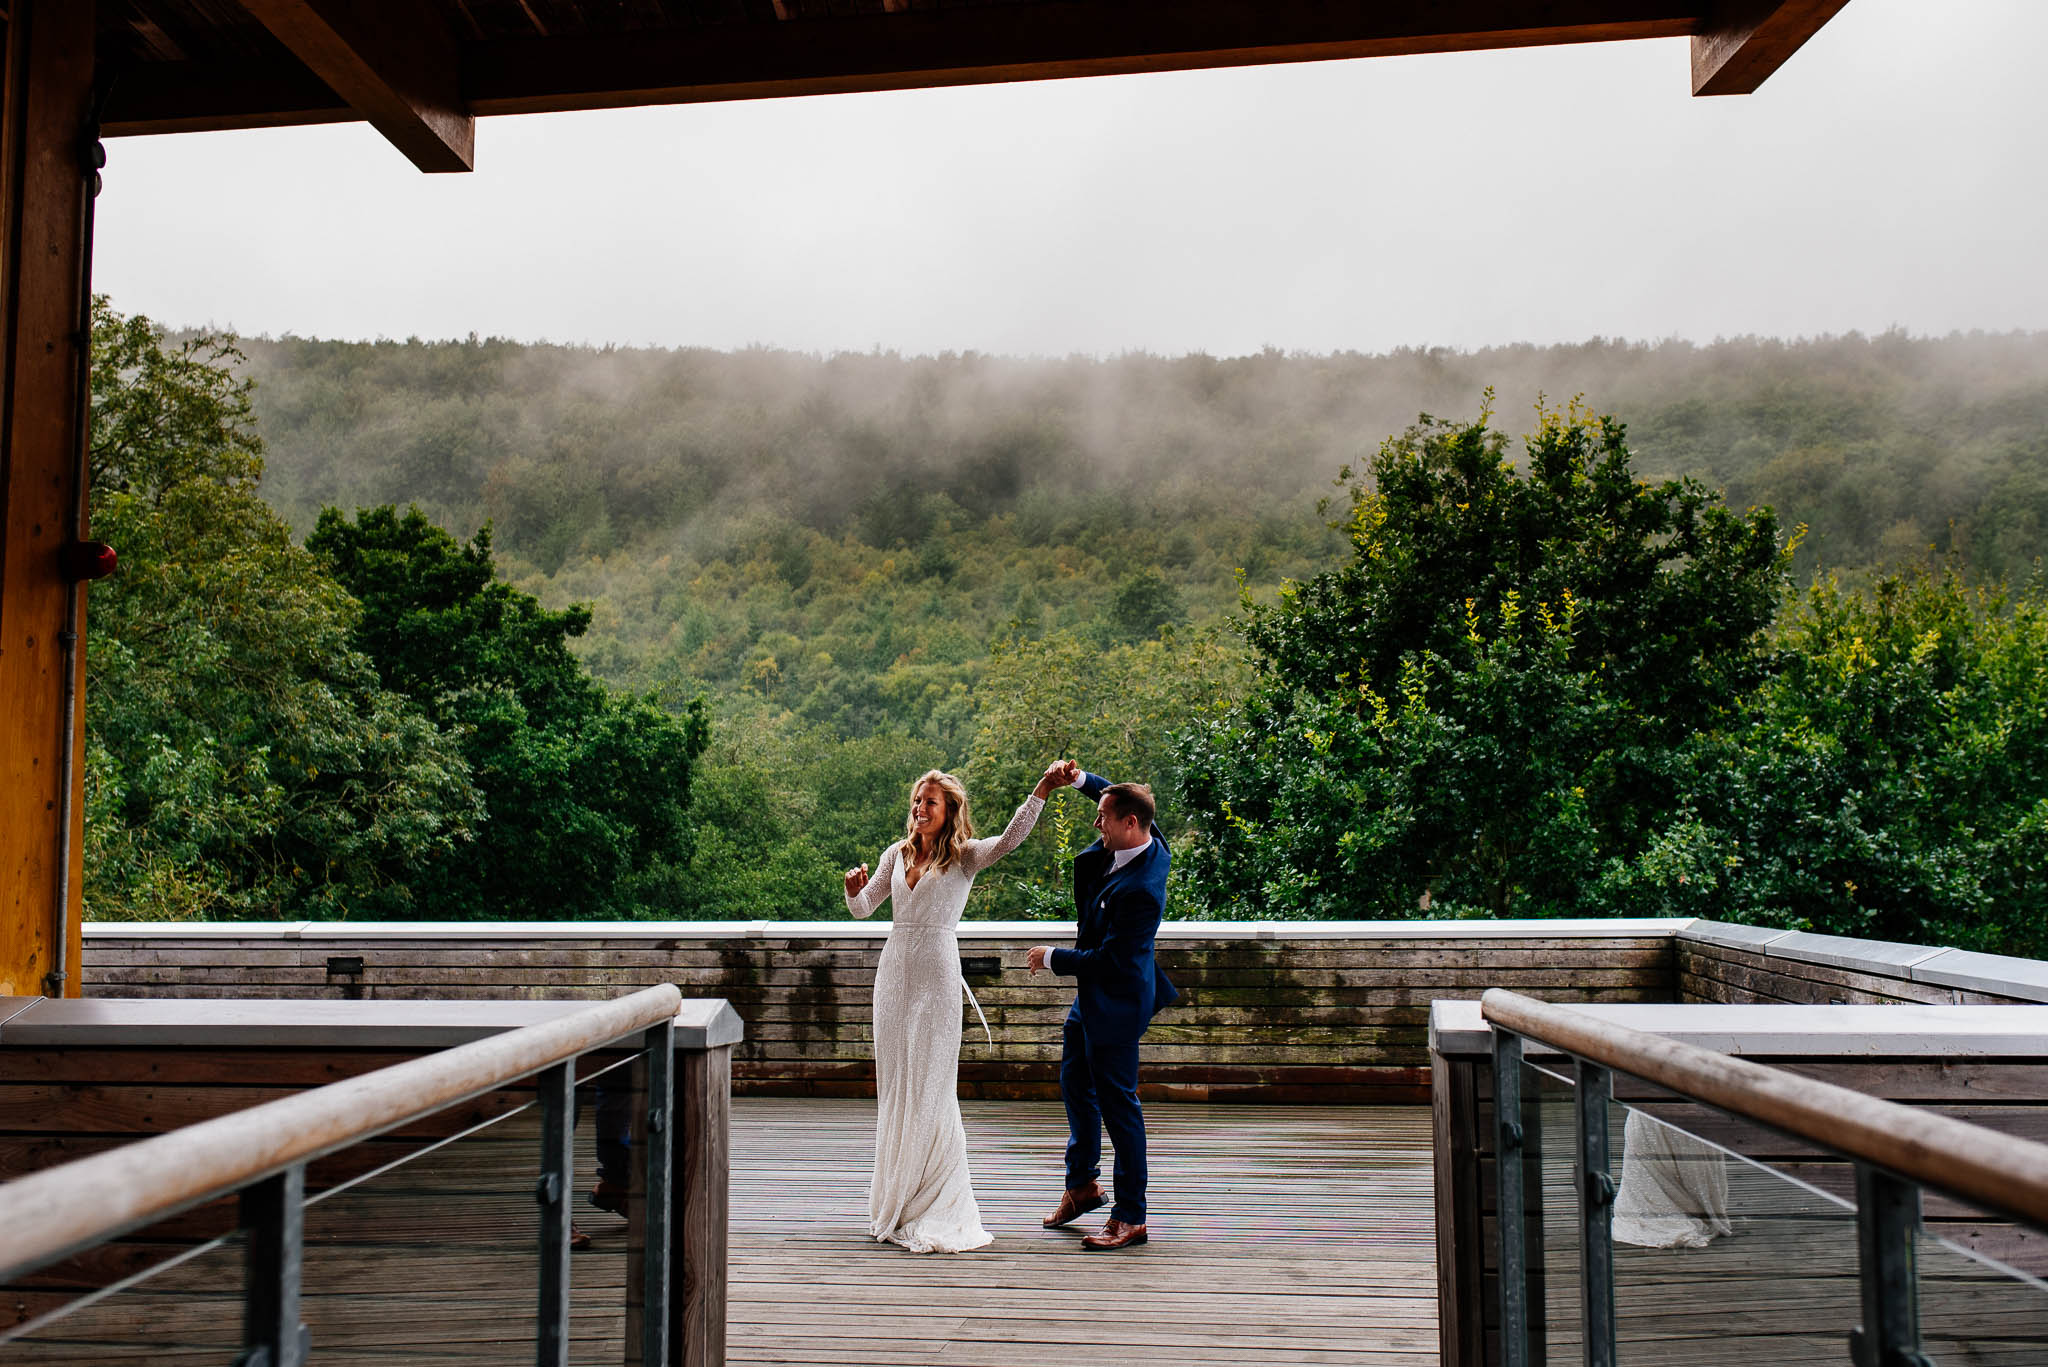 Newly married couple dancing on a viewing balcony in the middle of Dalby Forest in Yorkshire.